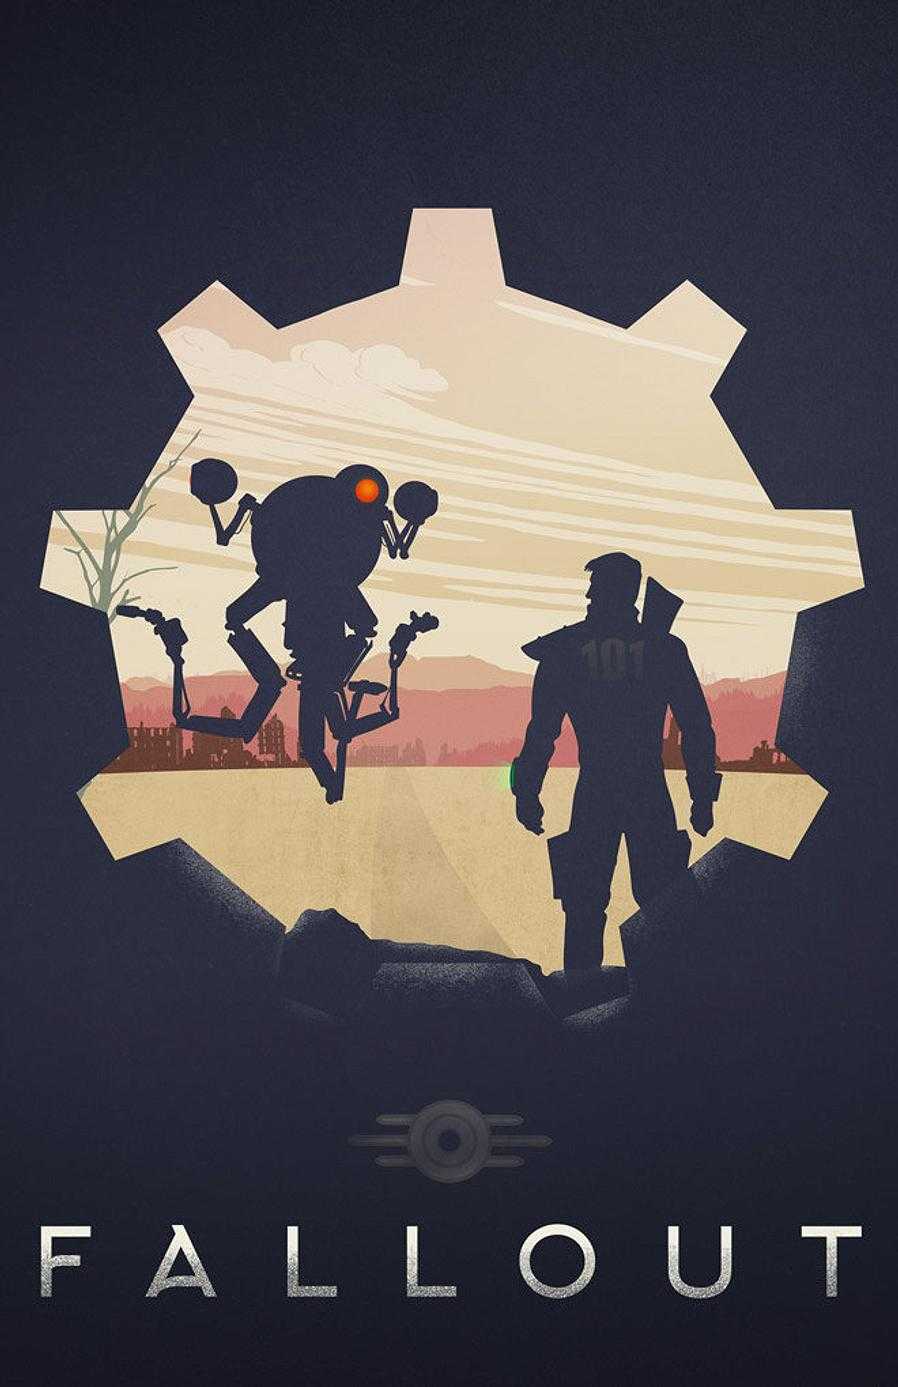 Iphone Fallout Wallpaper Kolpaper Awesome Free Hd Wallpapers